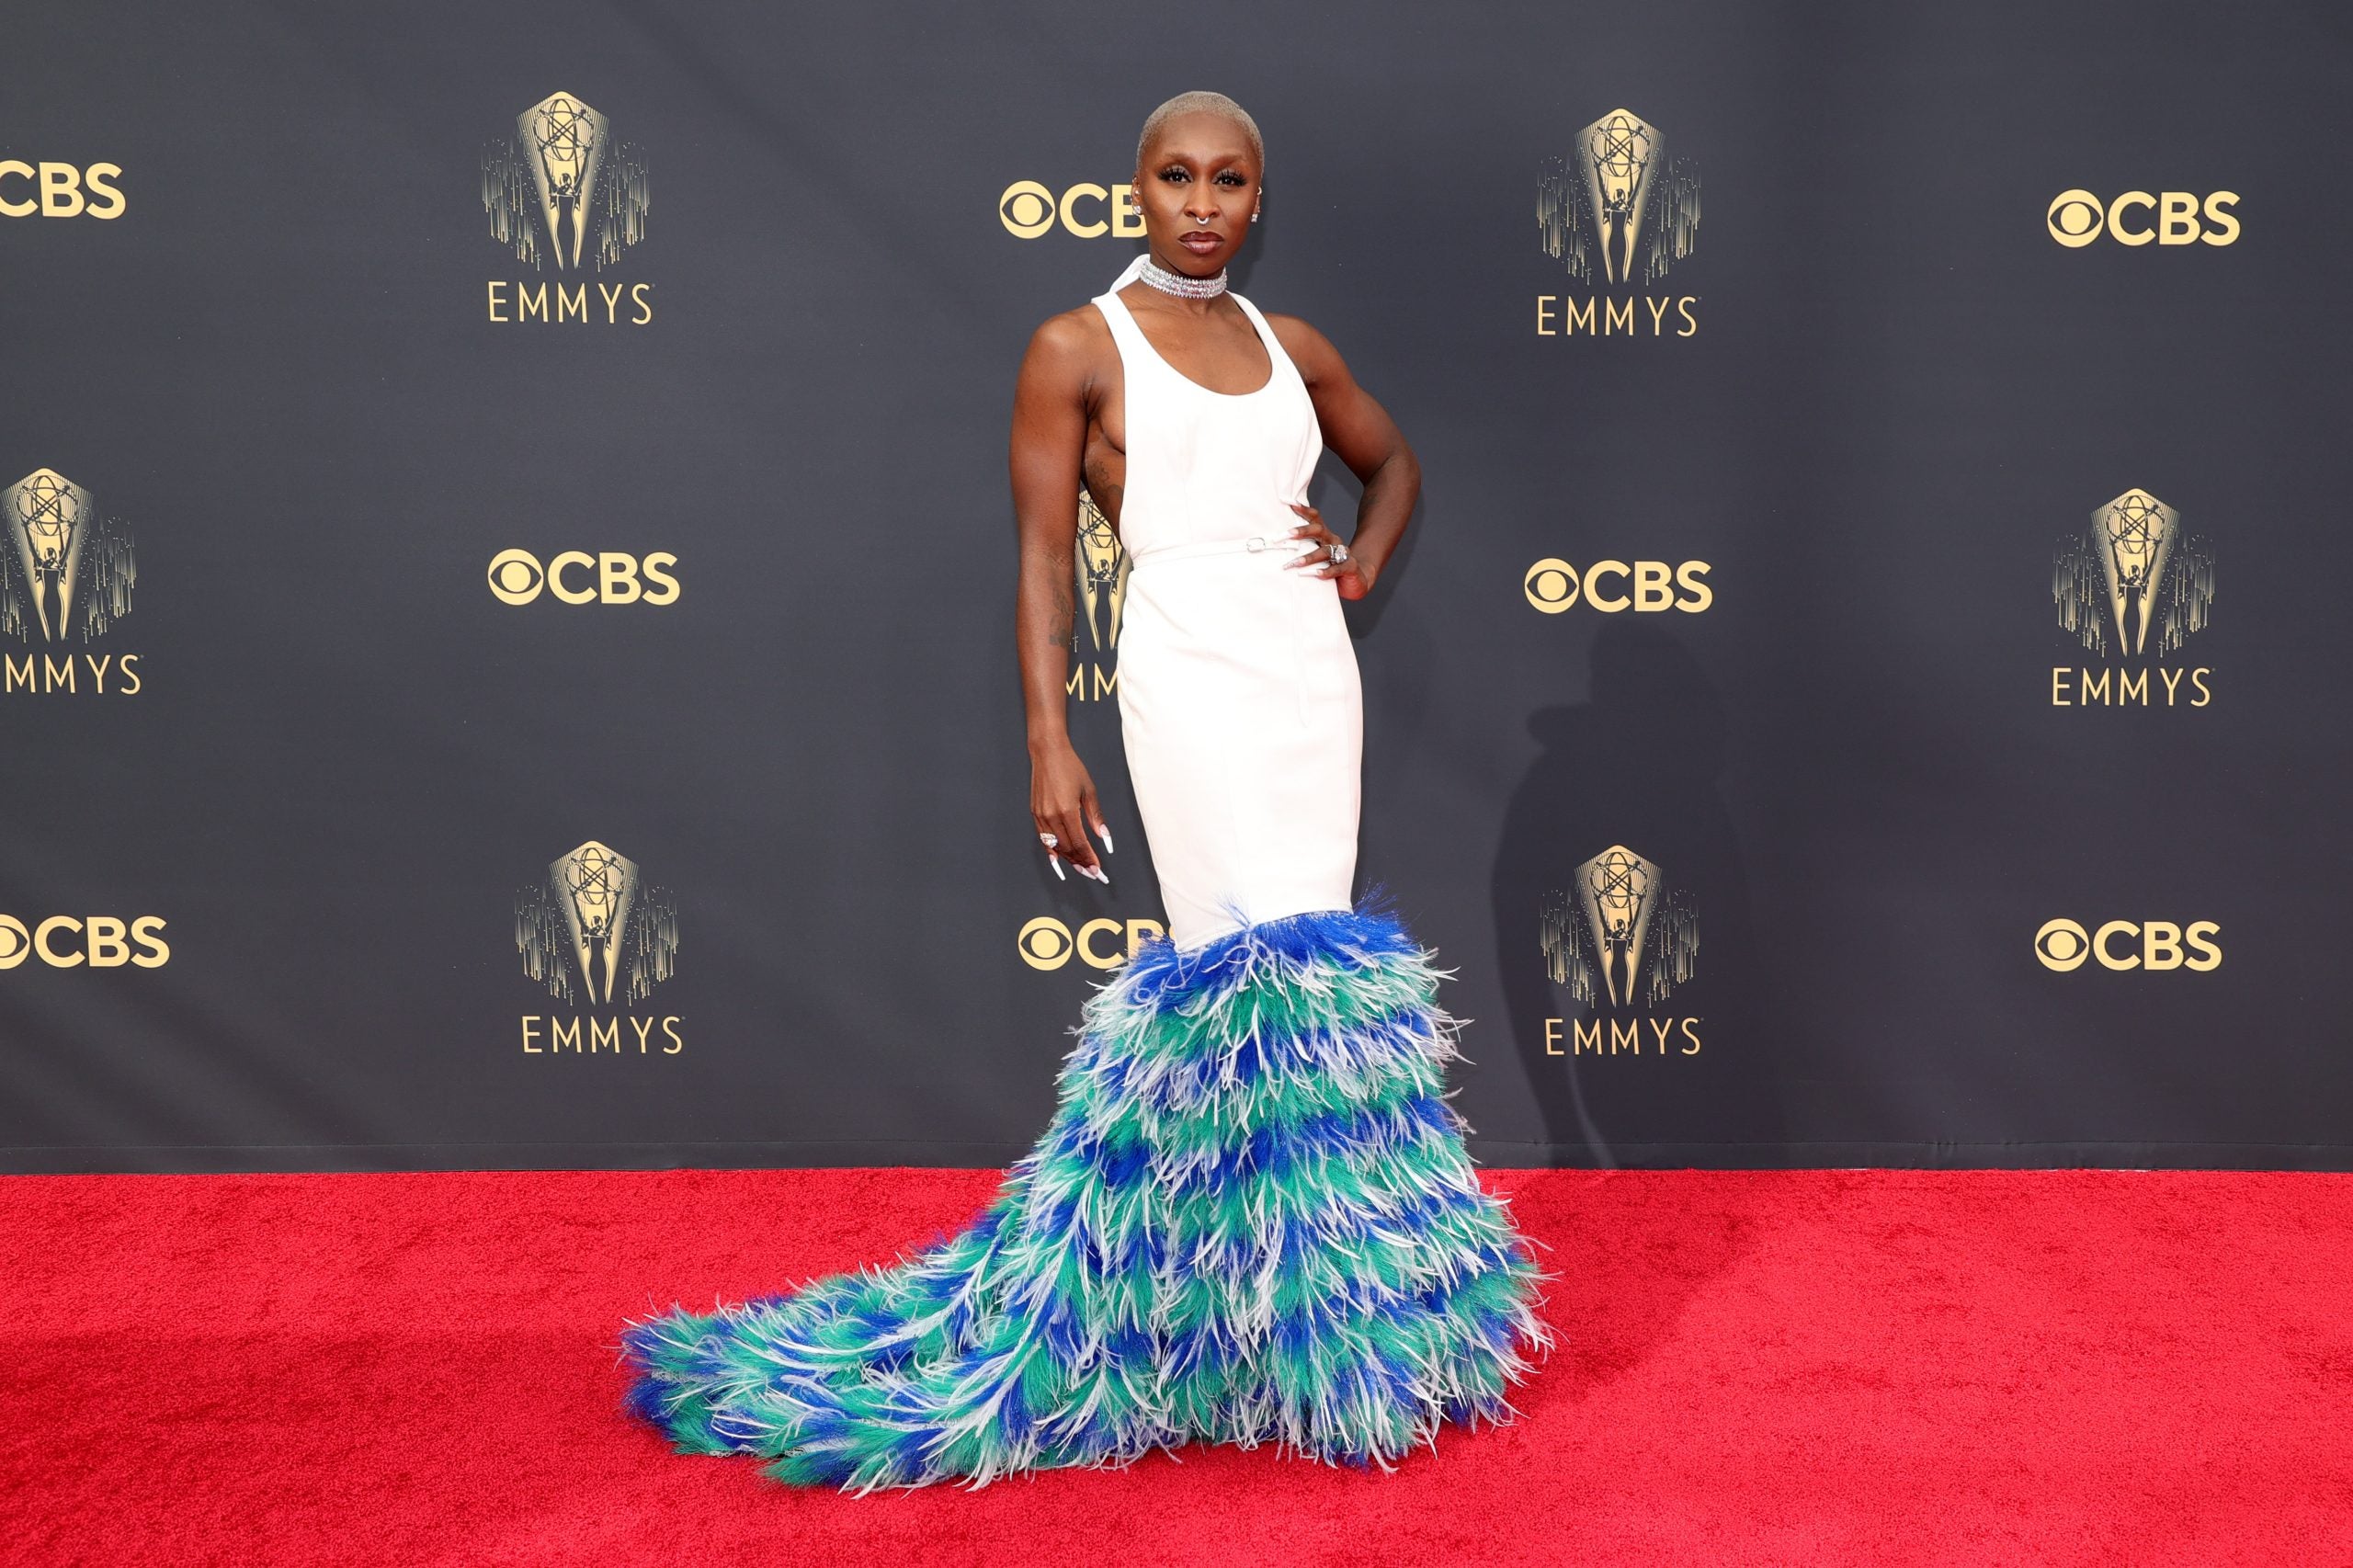 The Surprising Fashion Switch-Up At This Year's Emmy Awards